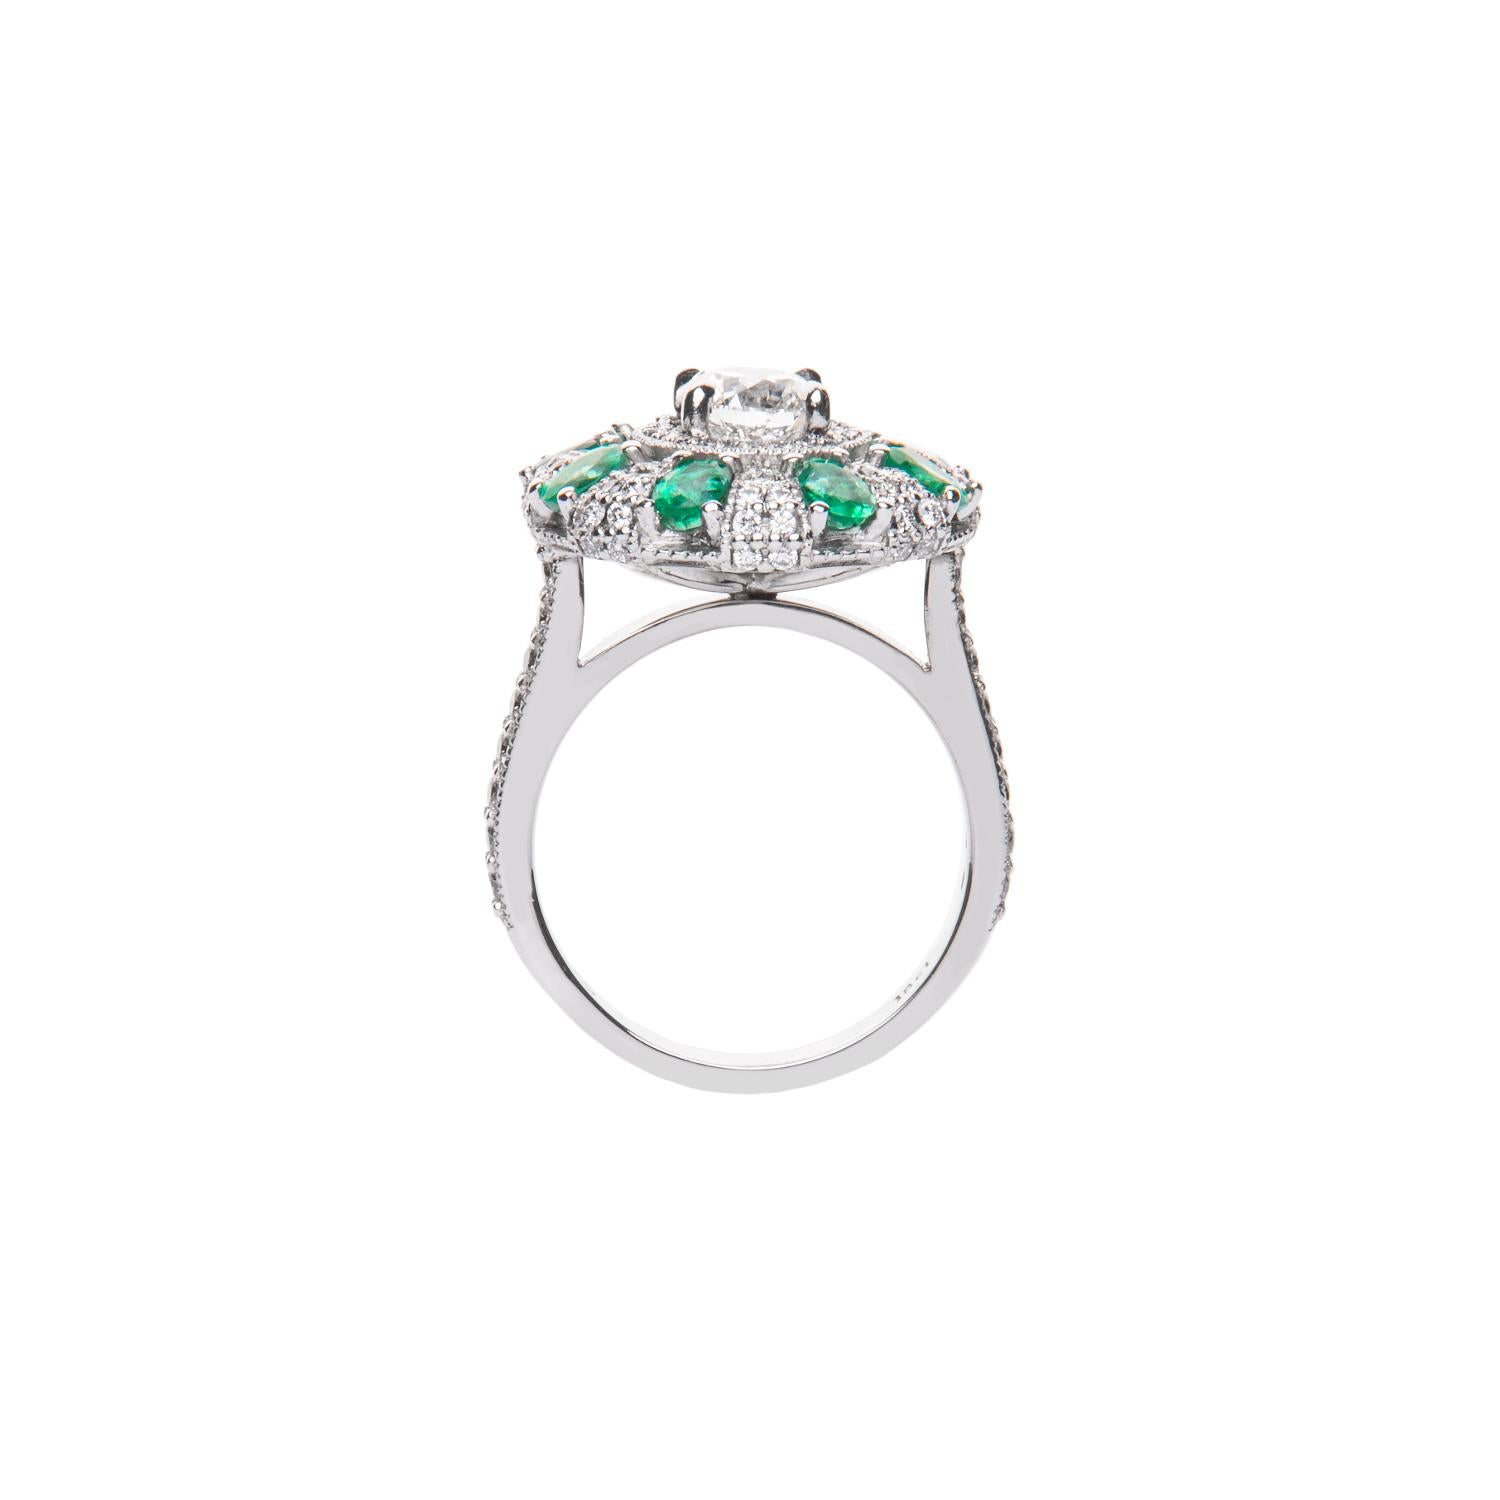 Round Cut 0.78 Carat Round Diamond Emerald Cluster Ring White Gold Natalie Barney For Sale